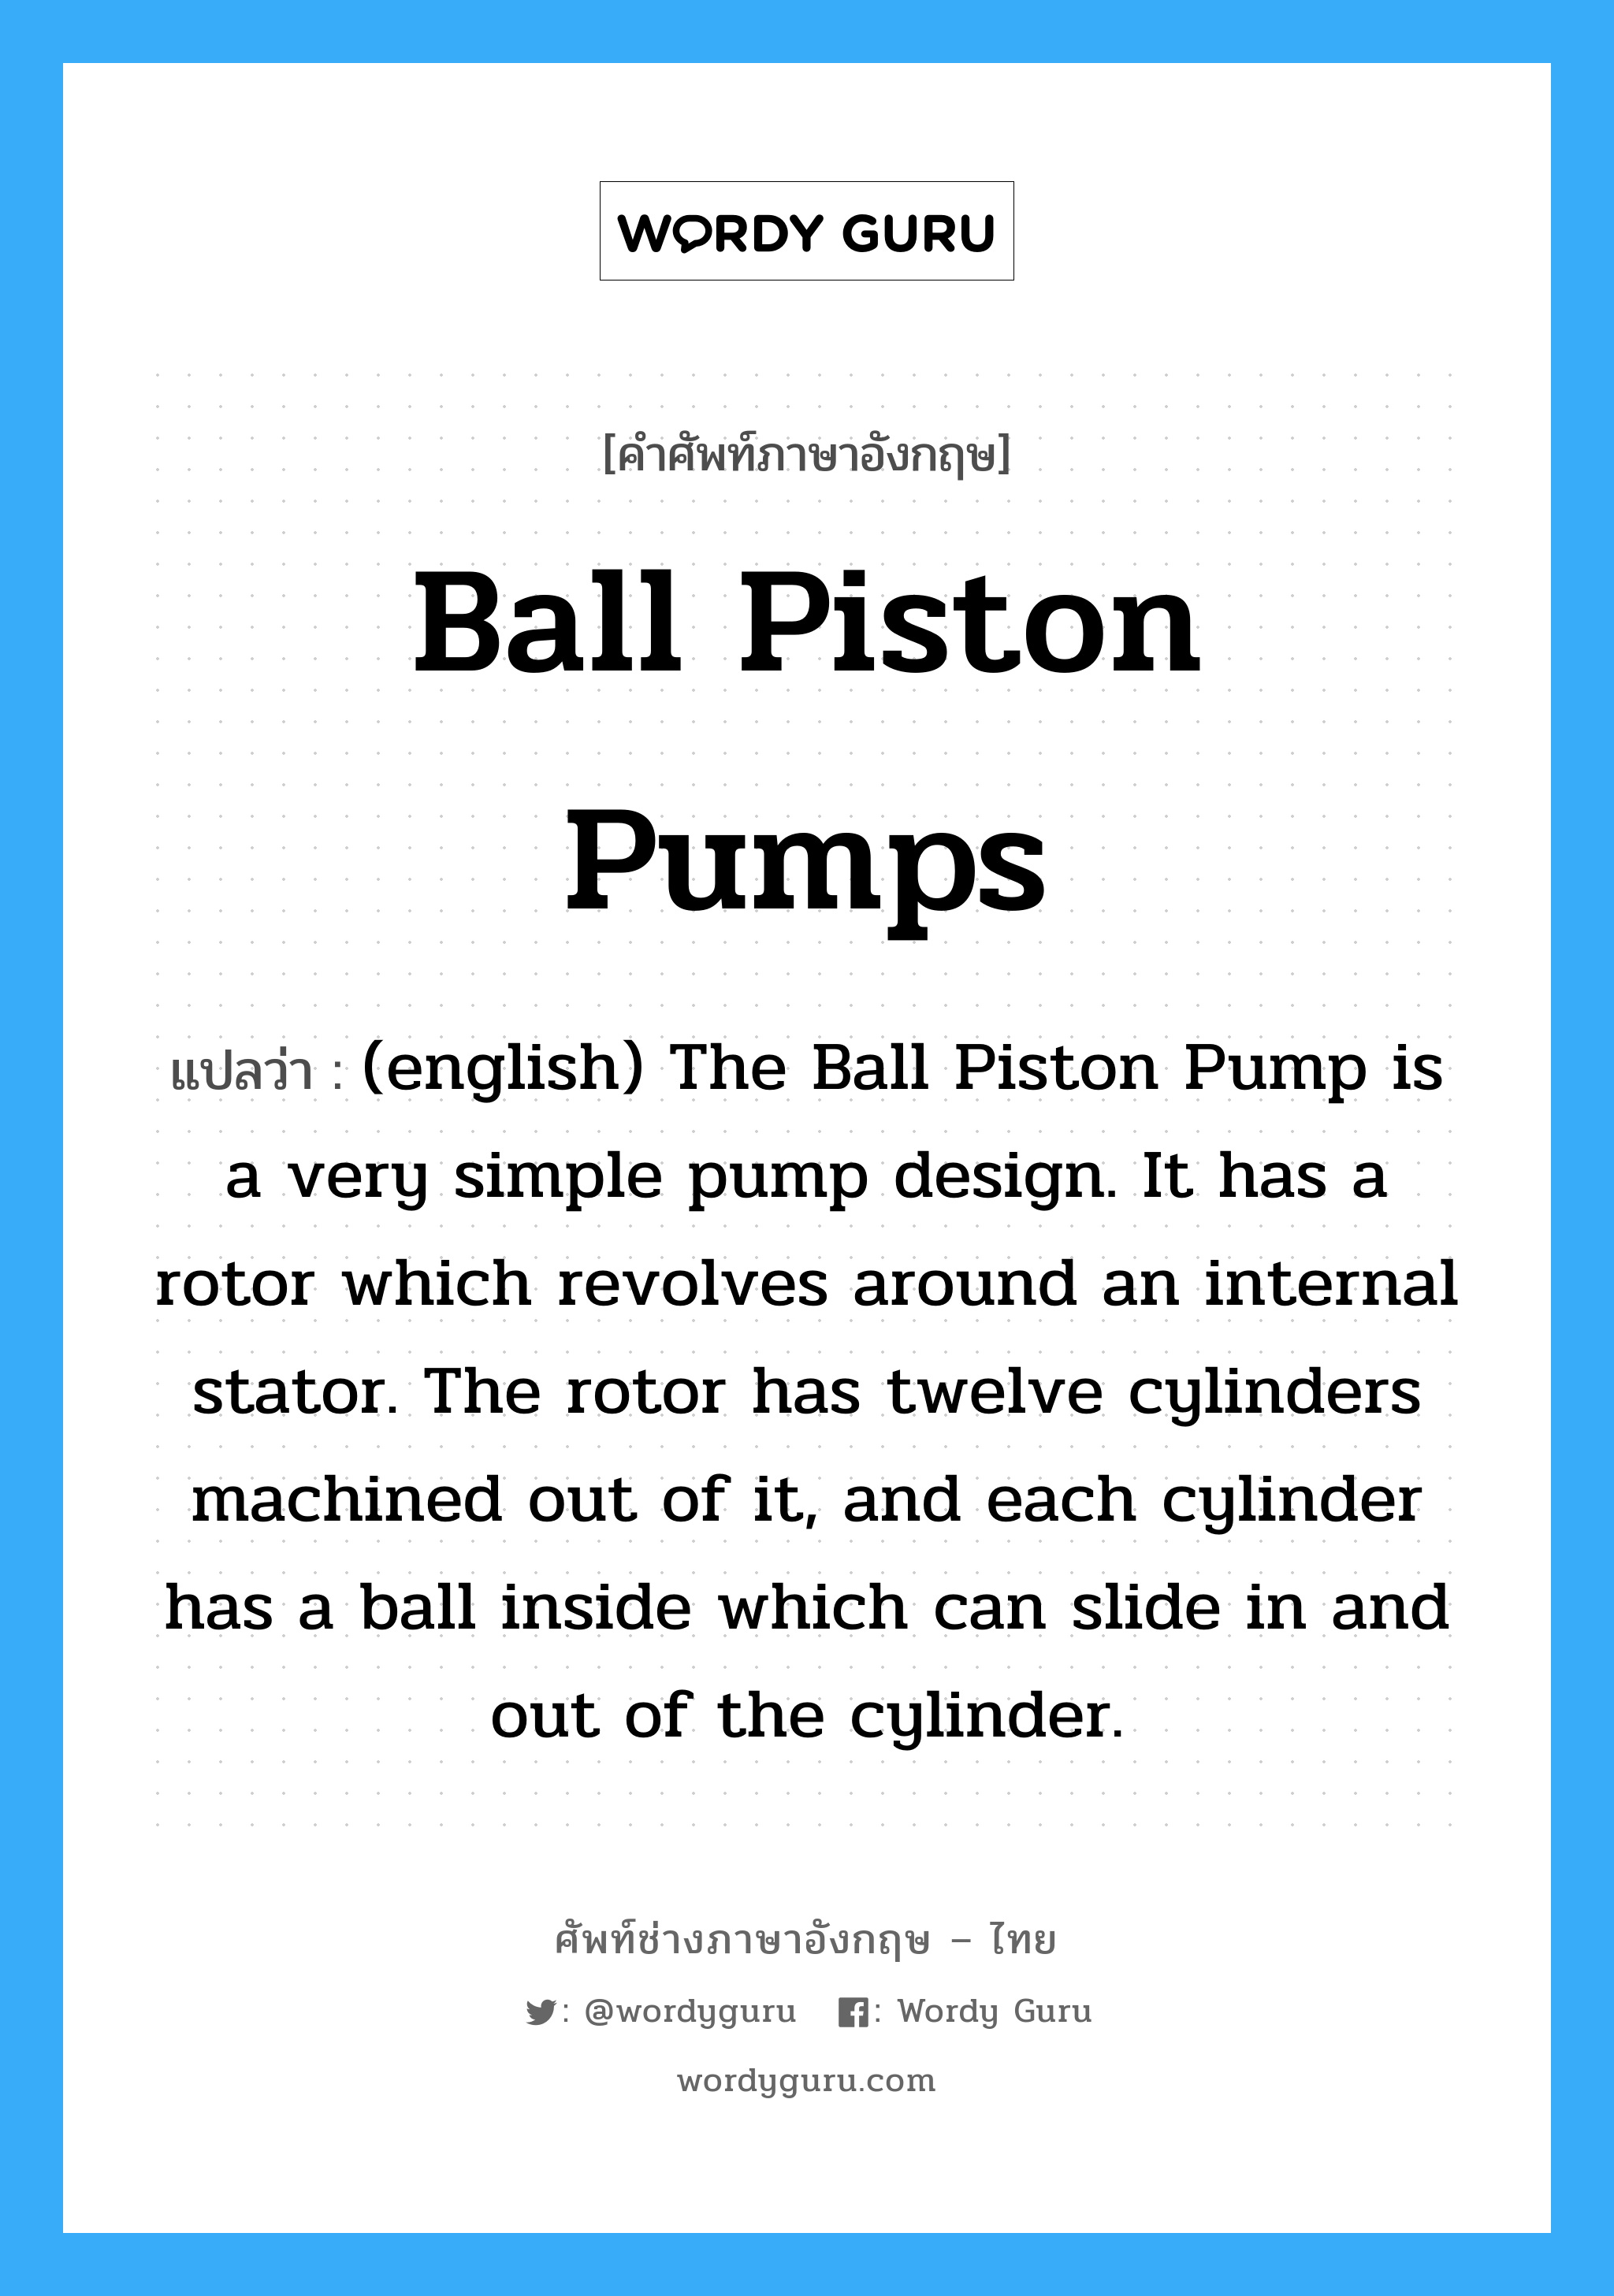 Ball Piston Pumps แปลว่า?, คำศัพท์ช่างภาษาอังกฤษ - ไทย Ball Piston Pumps คำศัพท์ภาษาอังกฤษ Ball Piston Pumps แปลว่า (english) The Ball Piston Pump is a very simple pump design. It has a rotor which revolves around an internal stator. The rotor has twelve cylinders machined out of it, and each cylinder has a ball inside which can slide in and out of the cylinder.